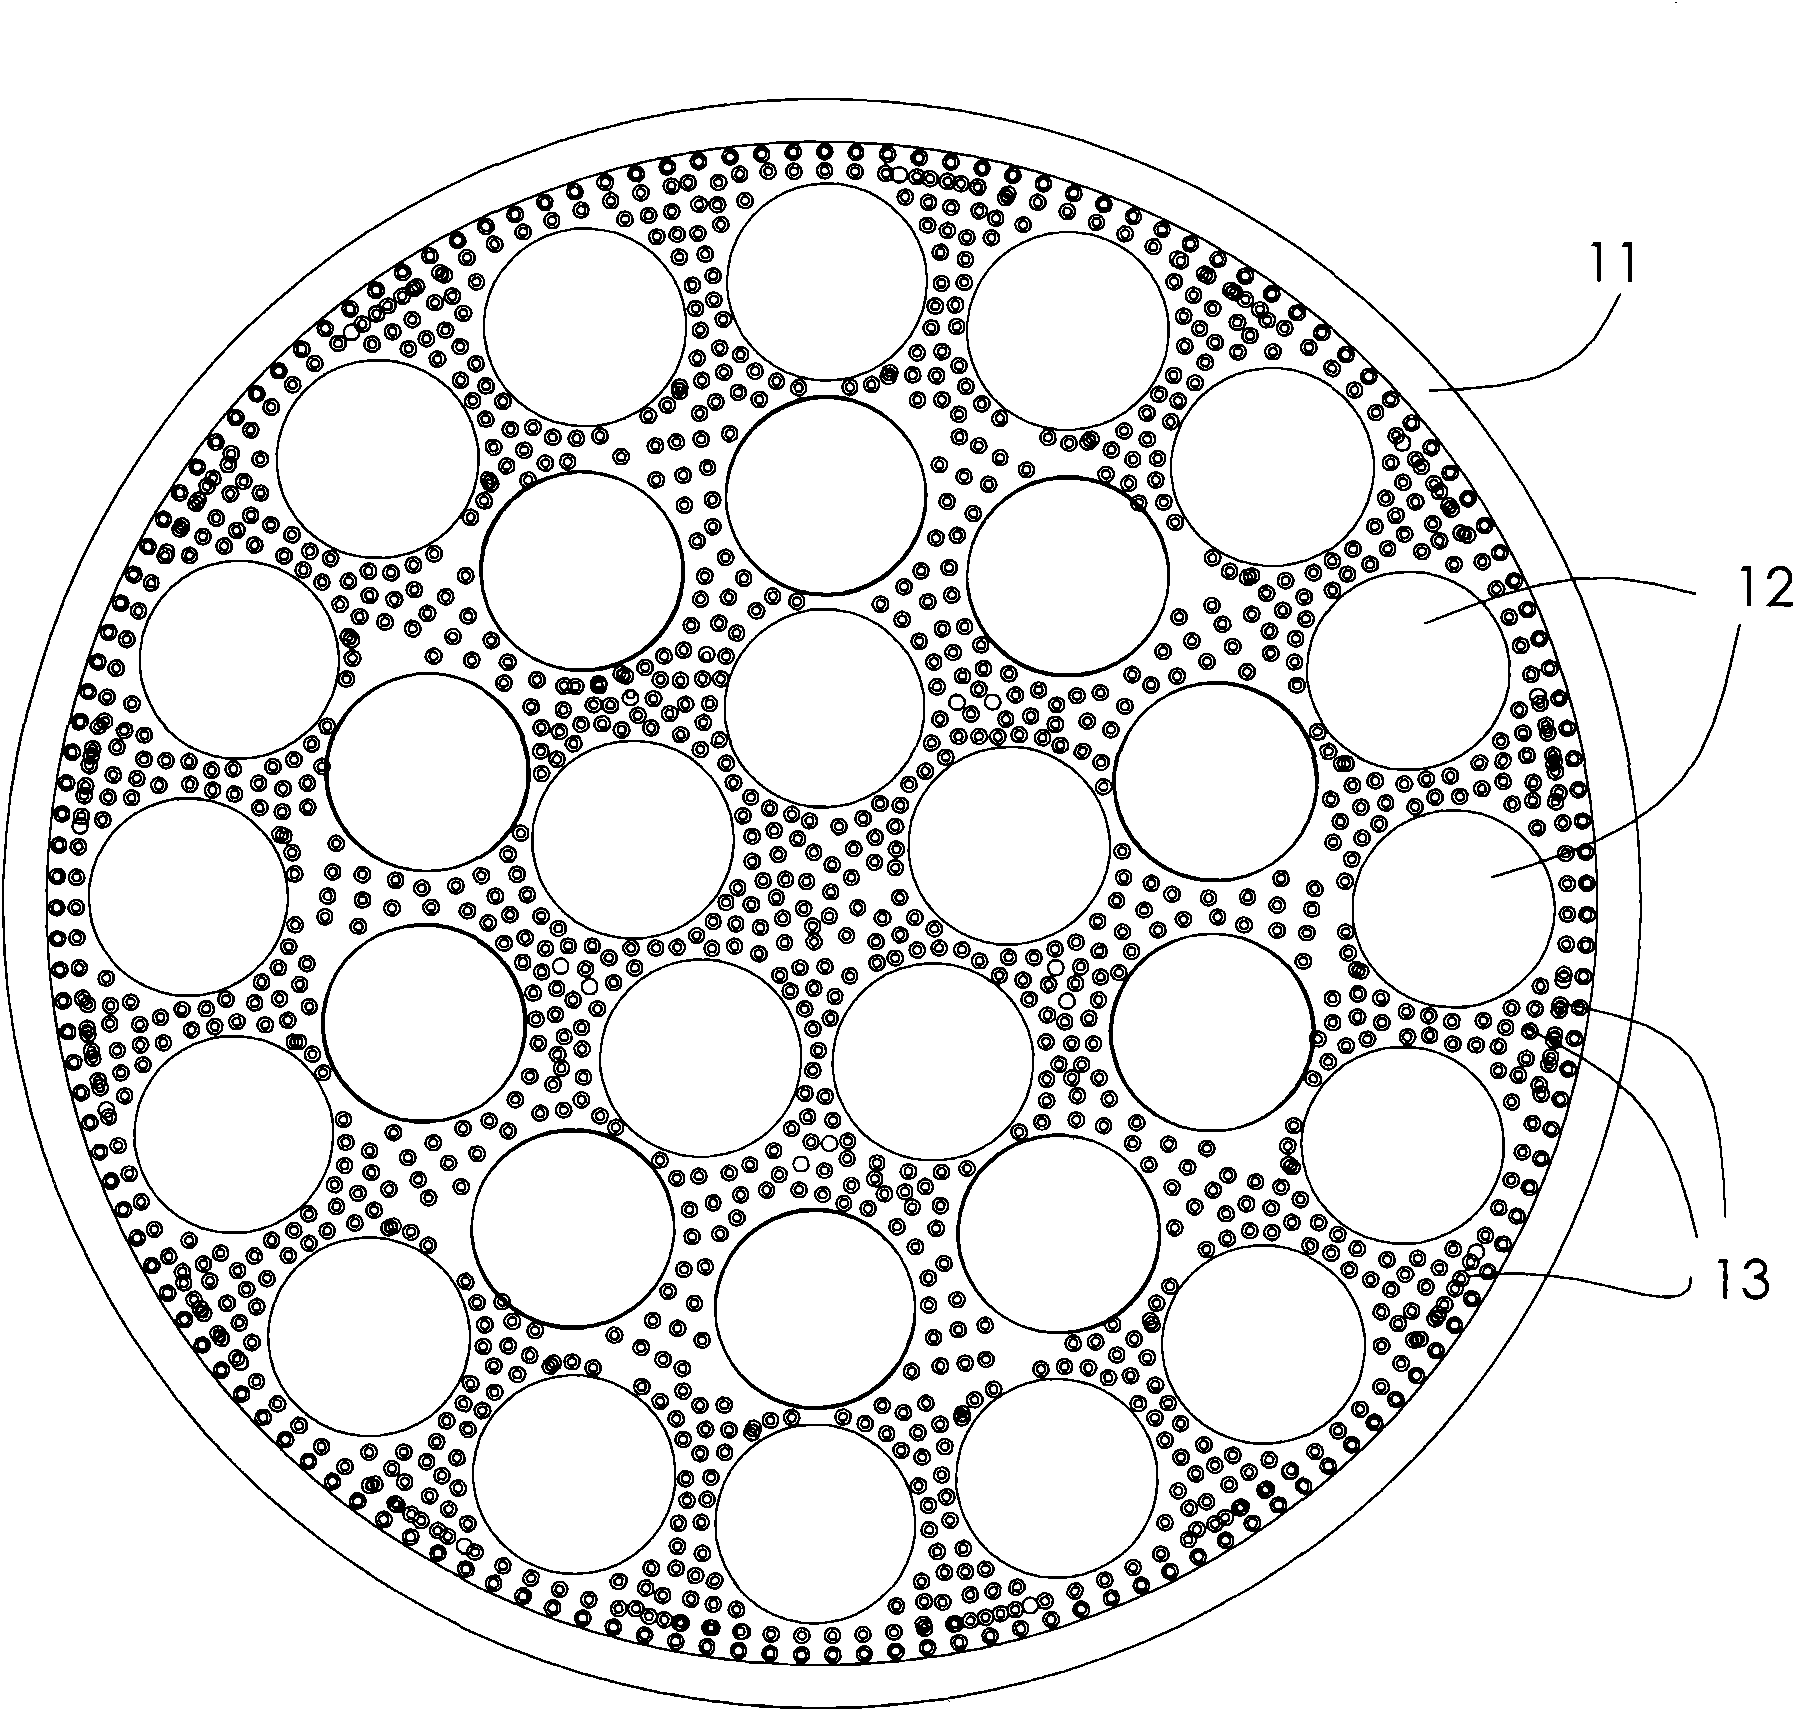 Method for producing reinforced carbon nano pipeline adopting fiber yarns as carriers